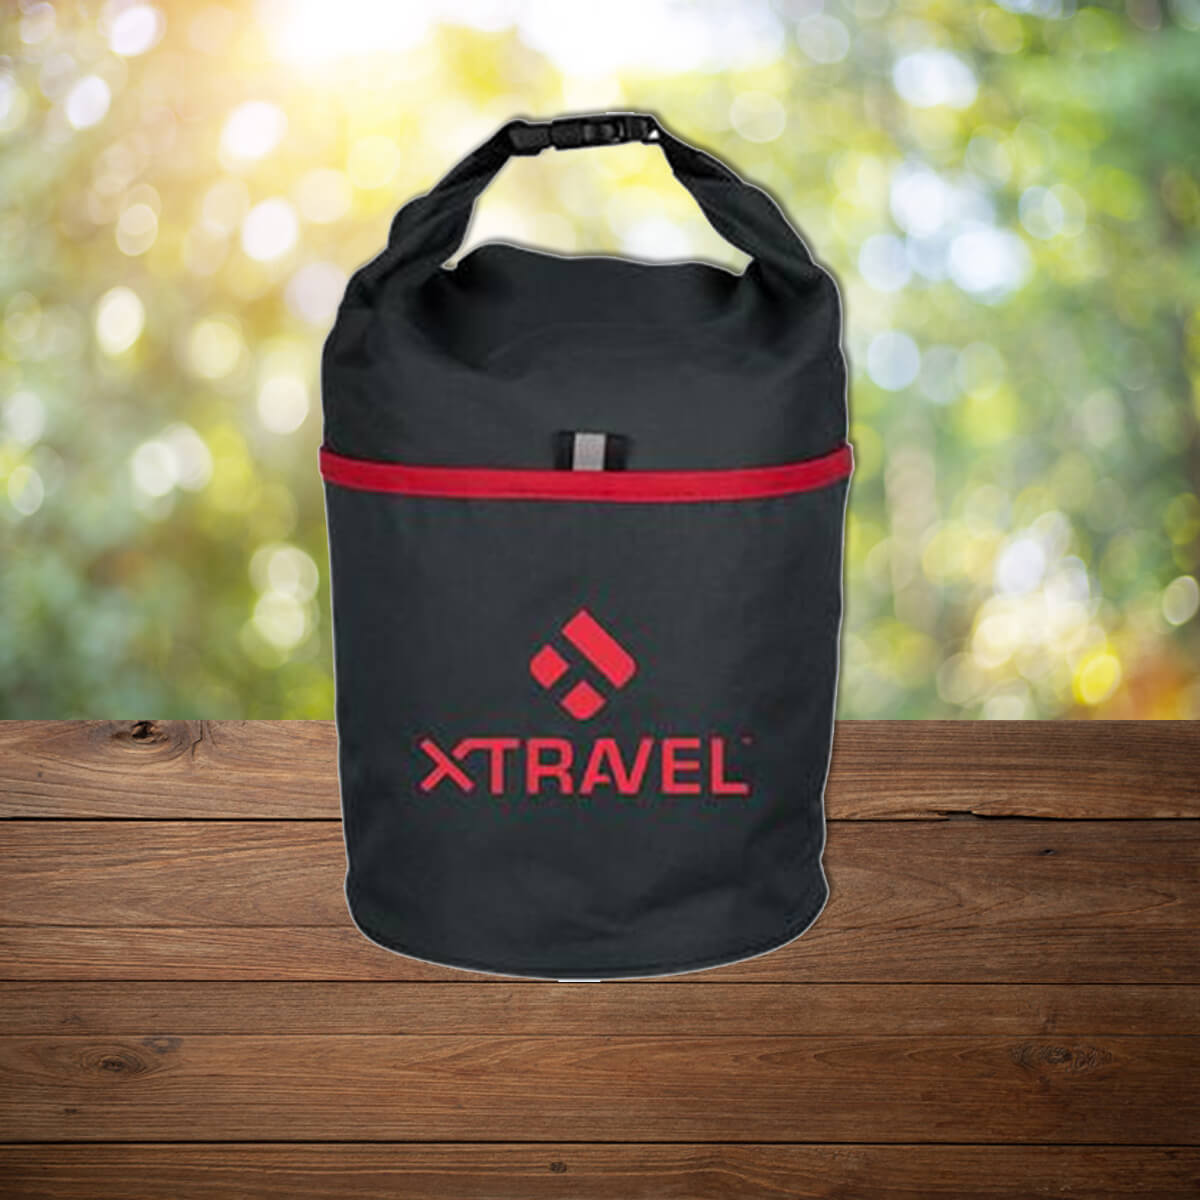 Round black with red imprint custom promotional lunch box cooler bags by curative printing